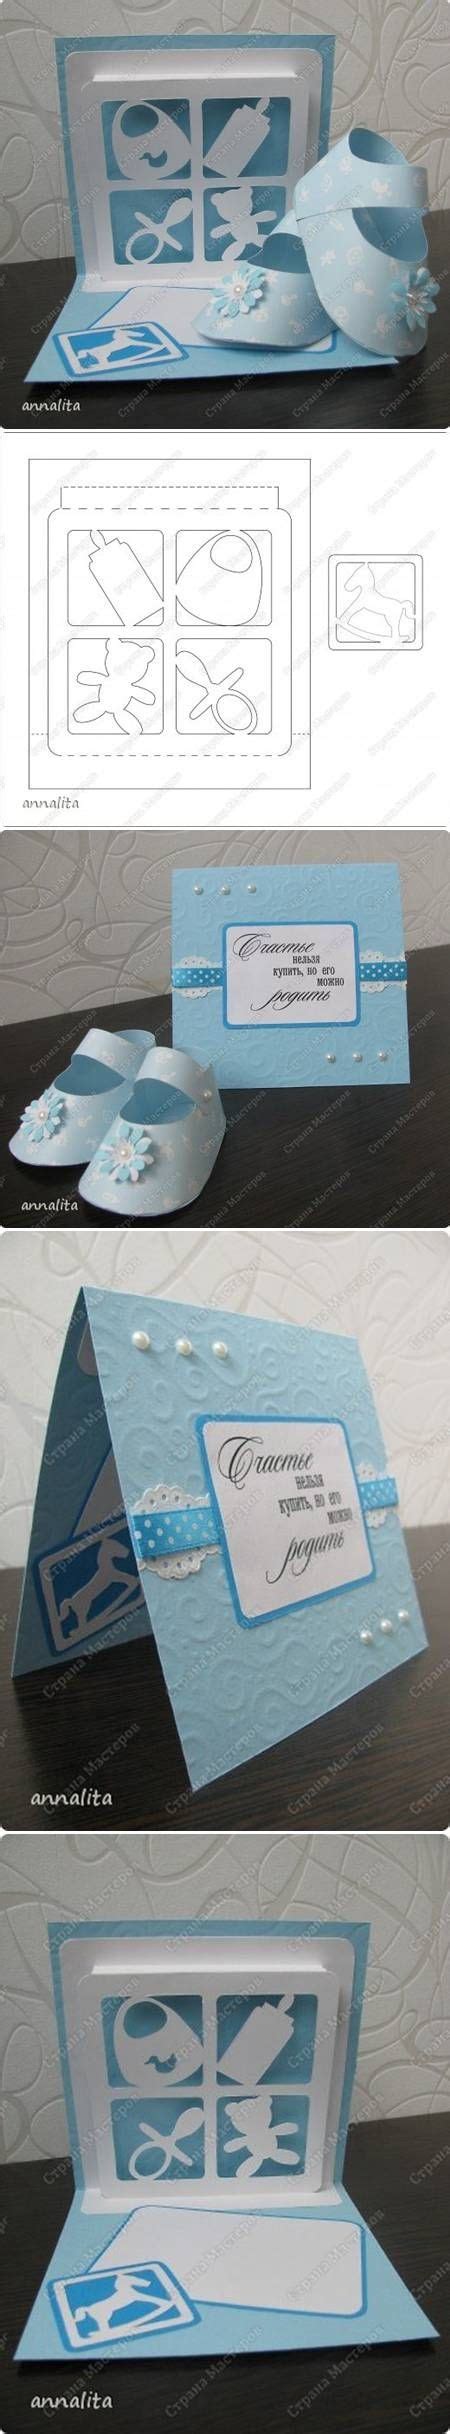 What is a science snack? DIY Newborn Card Template diy newborn easy crafts diy ideas diy crafts do it yourself easy diy ...